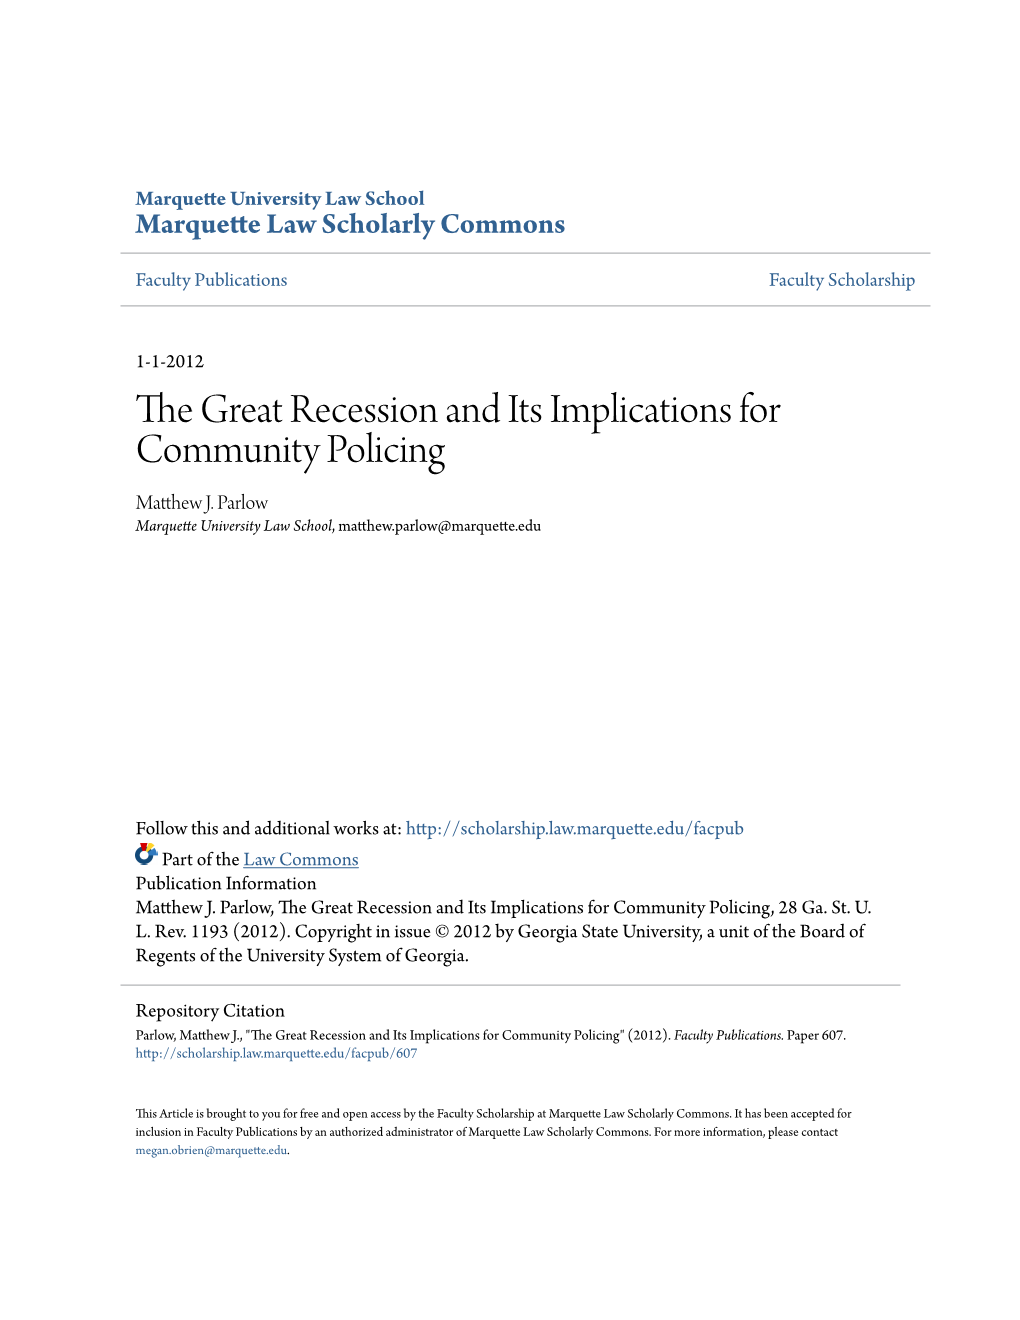 The Great Recession and Its Implications for Community Policing Matthew .J Parlow Marquette University Law School, Matthew.Parlow@Marquette.Edu